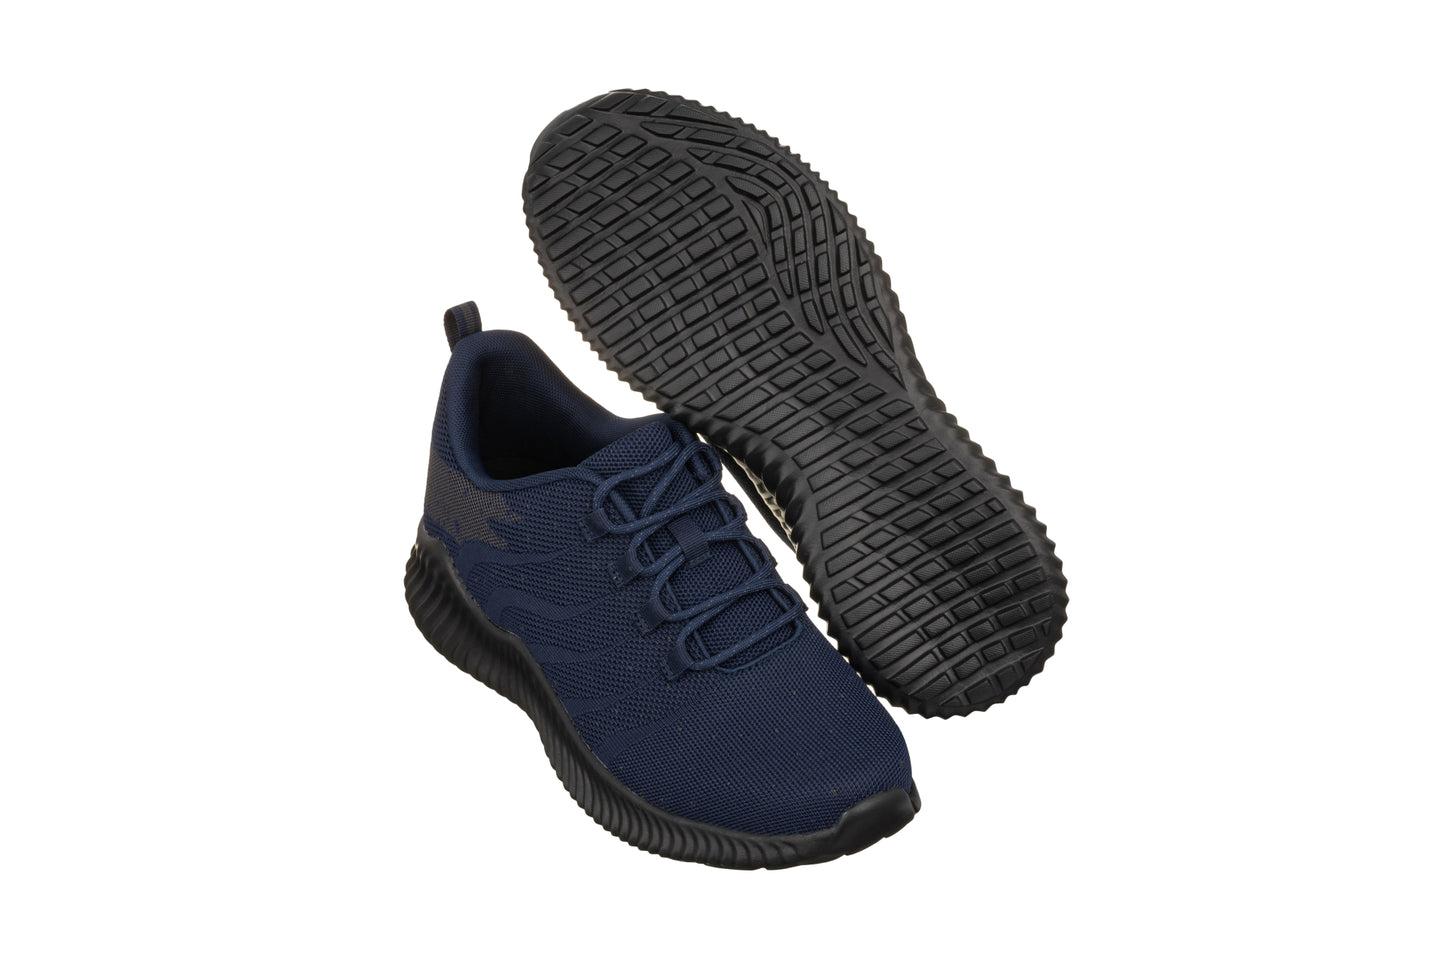 Elevator shoes height increase CALTO - Q217 - 2.8 Inches Taller (Navy/Grey) - Ultra Lightweight